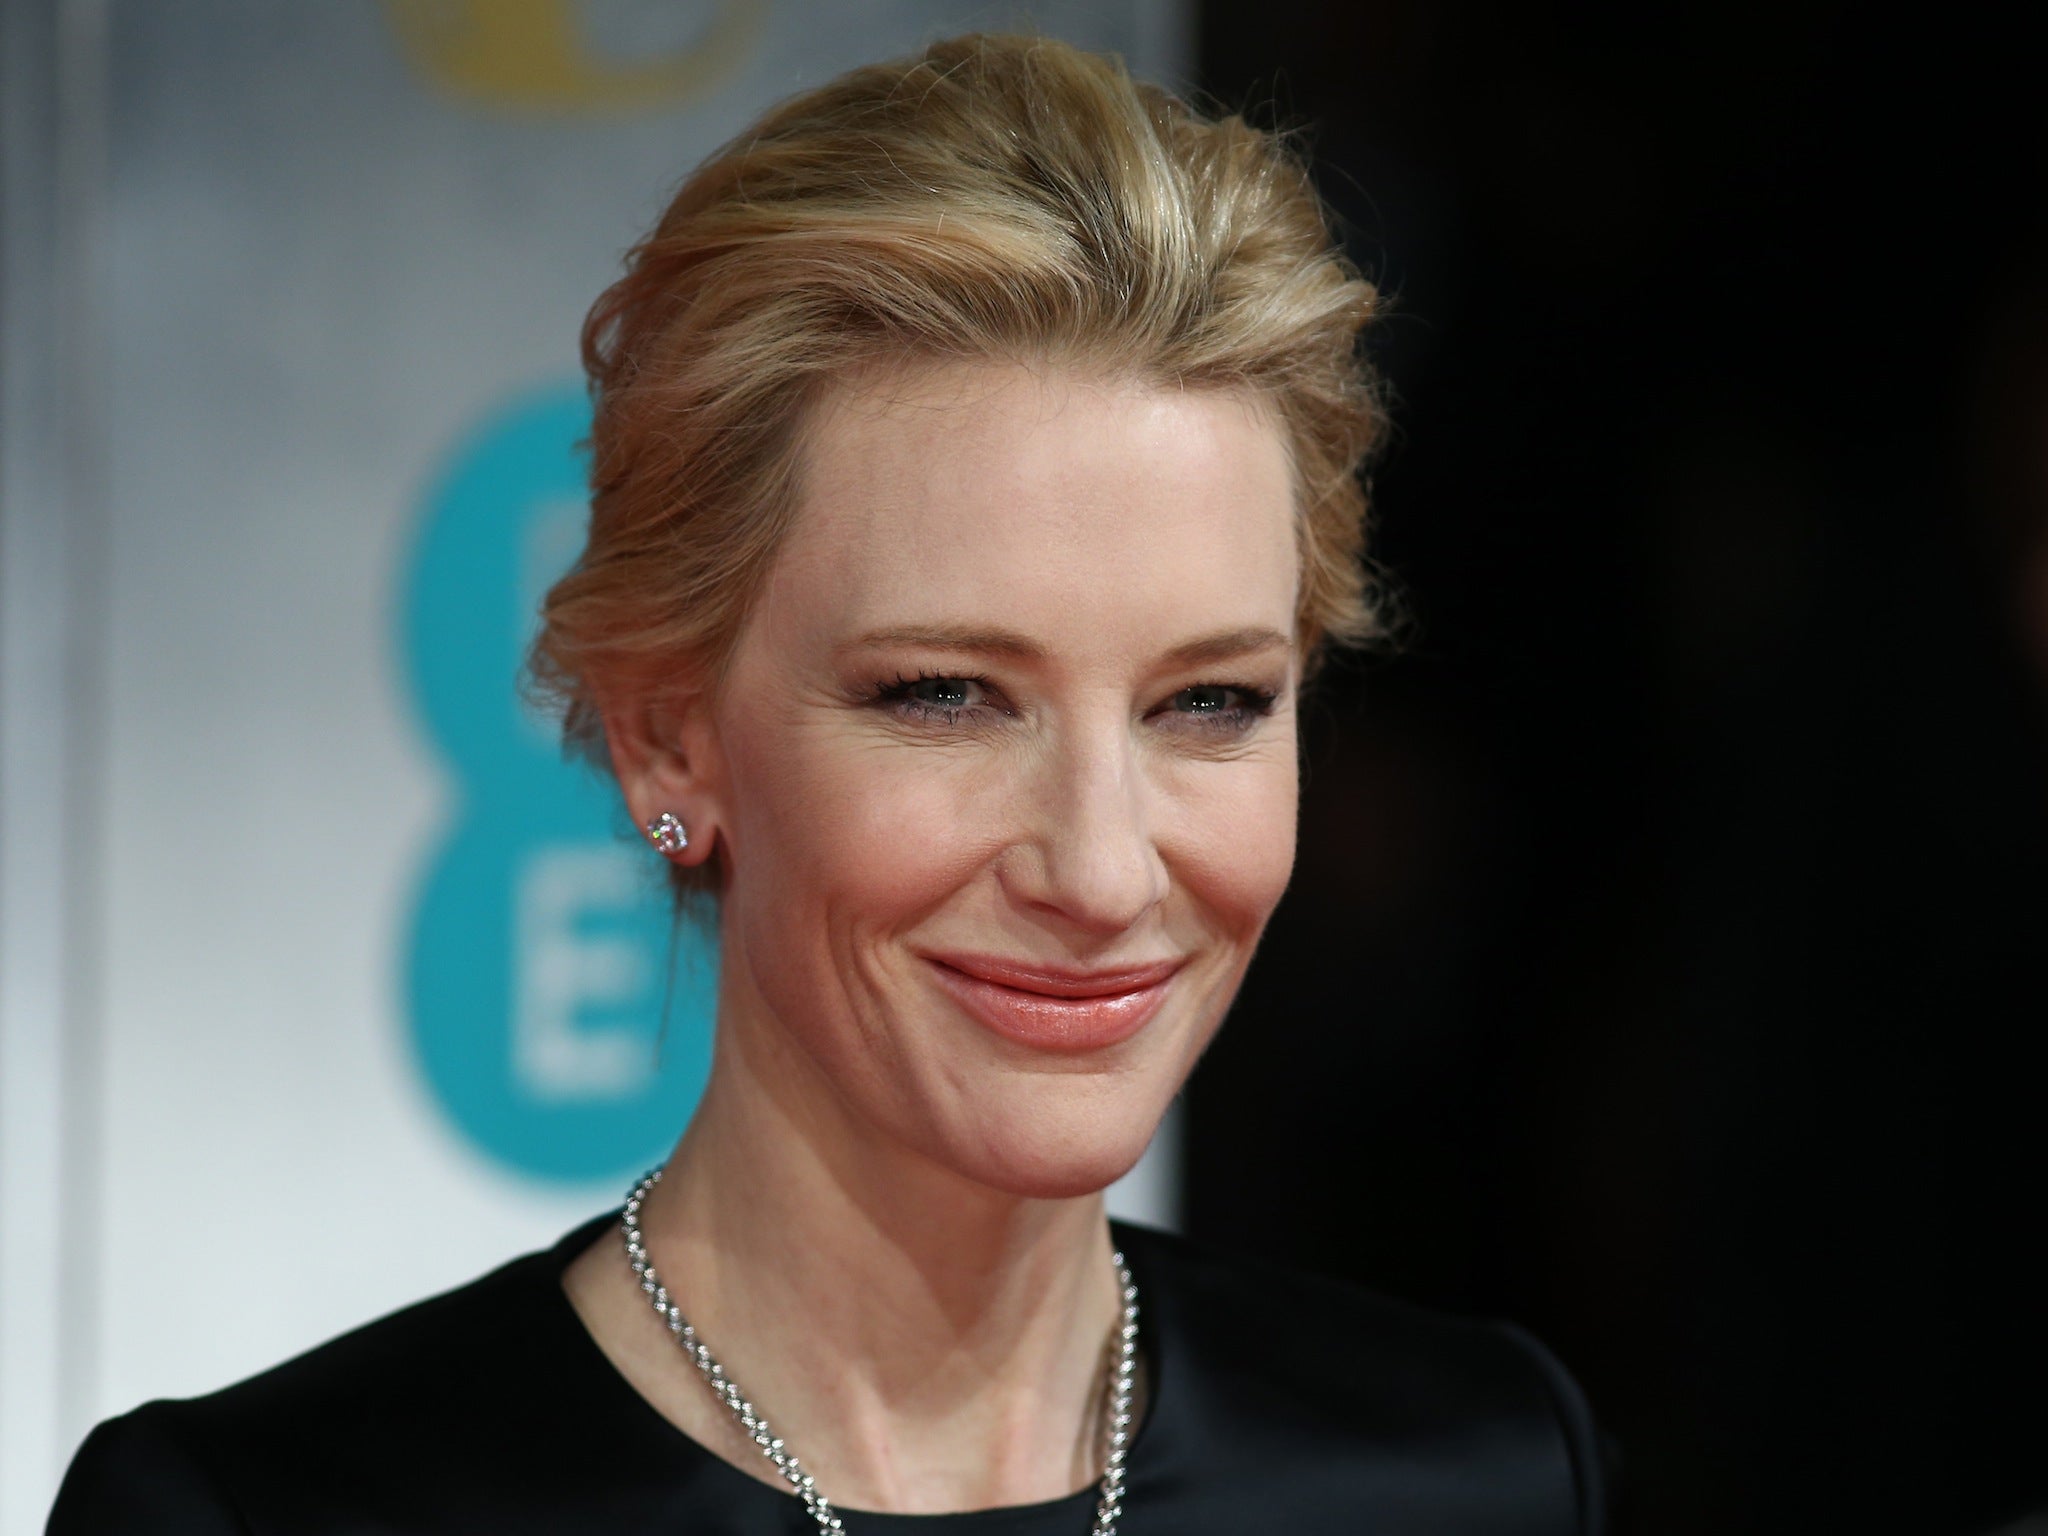 Cate Blanchett on the red carpet at the Baftas 2014